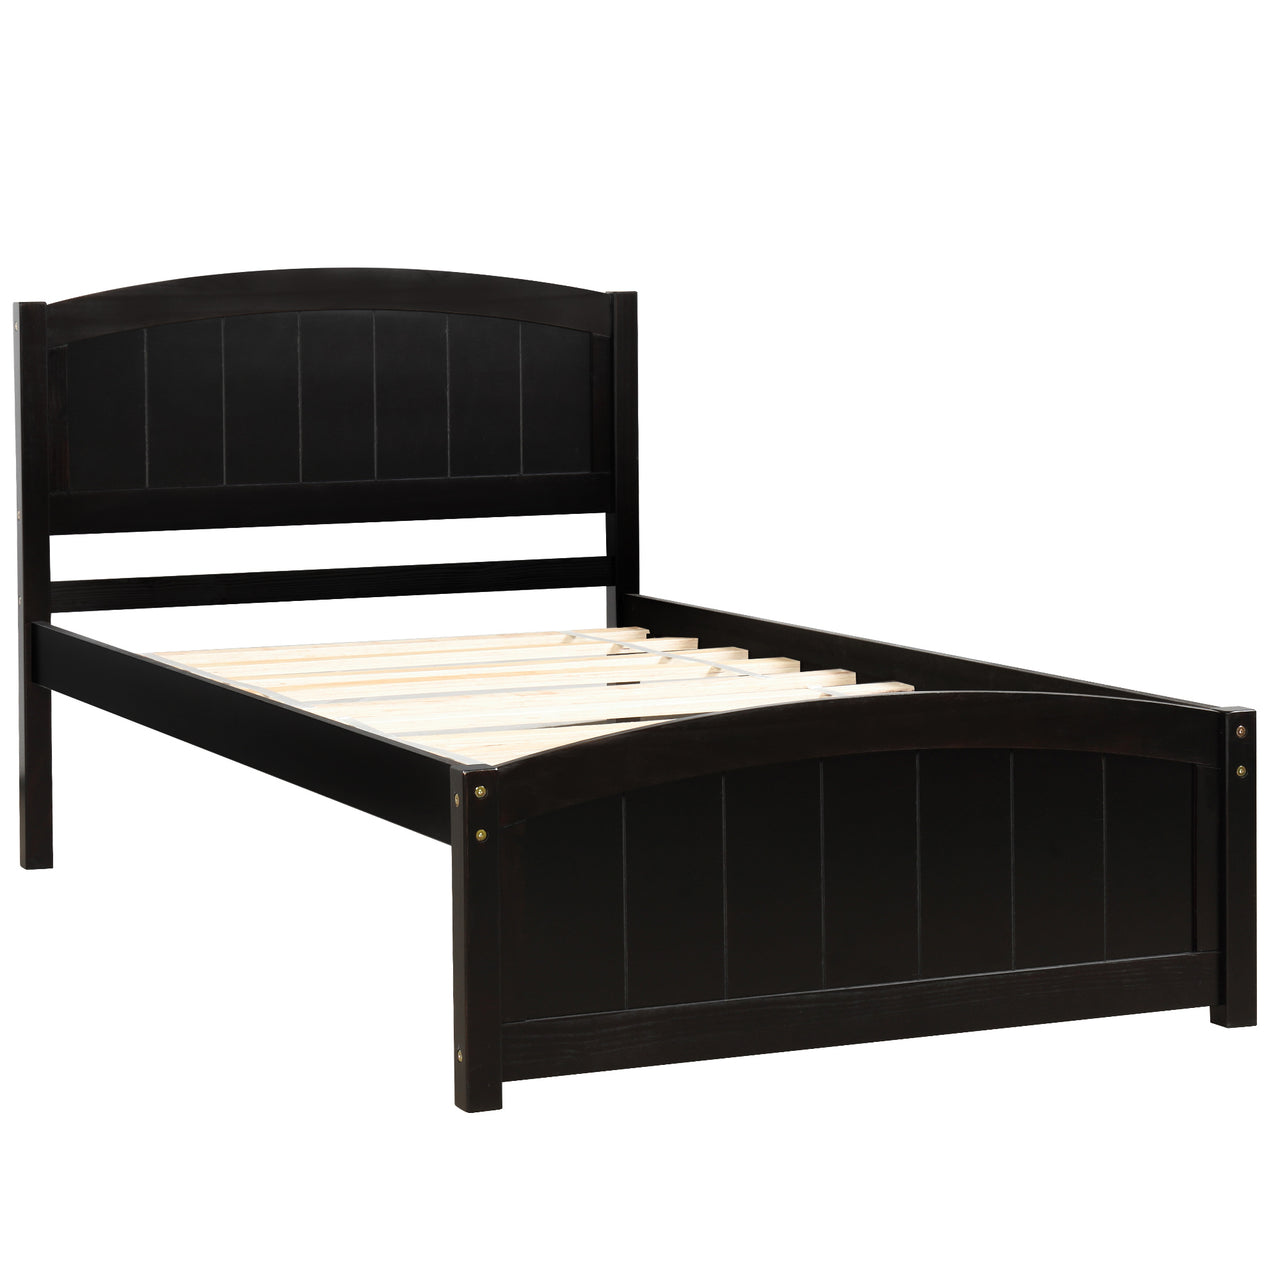 Wood Platform Bed with Headboard,Footboard and Wood Slat Support, Espresso